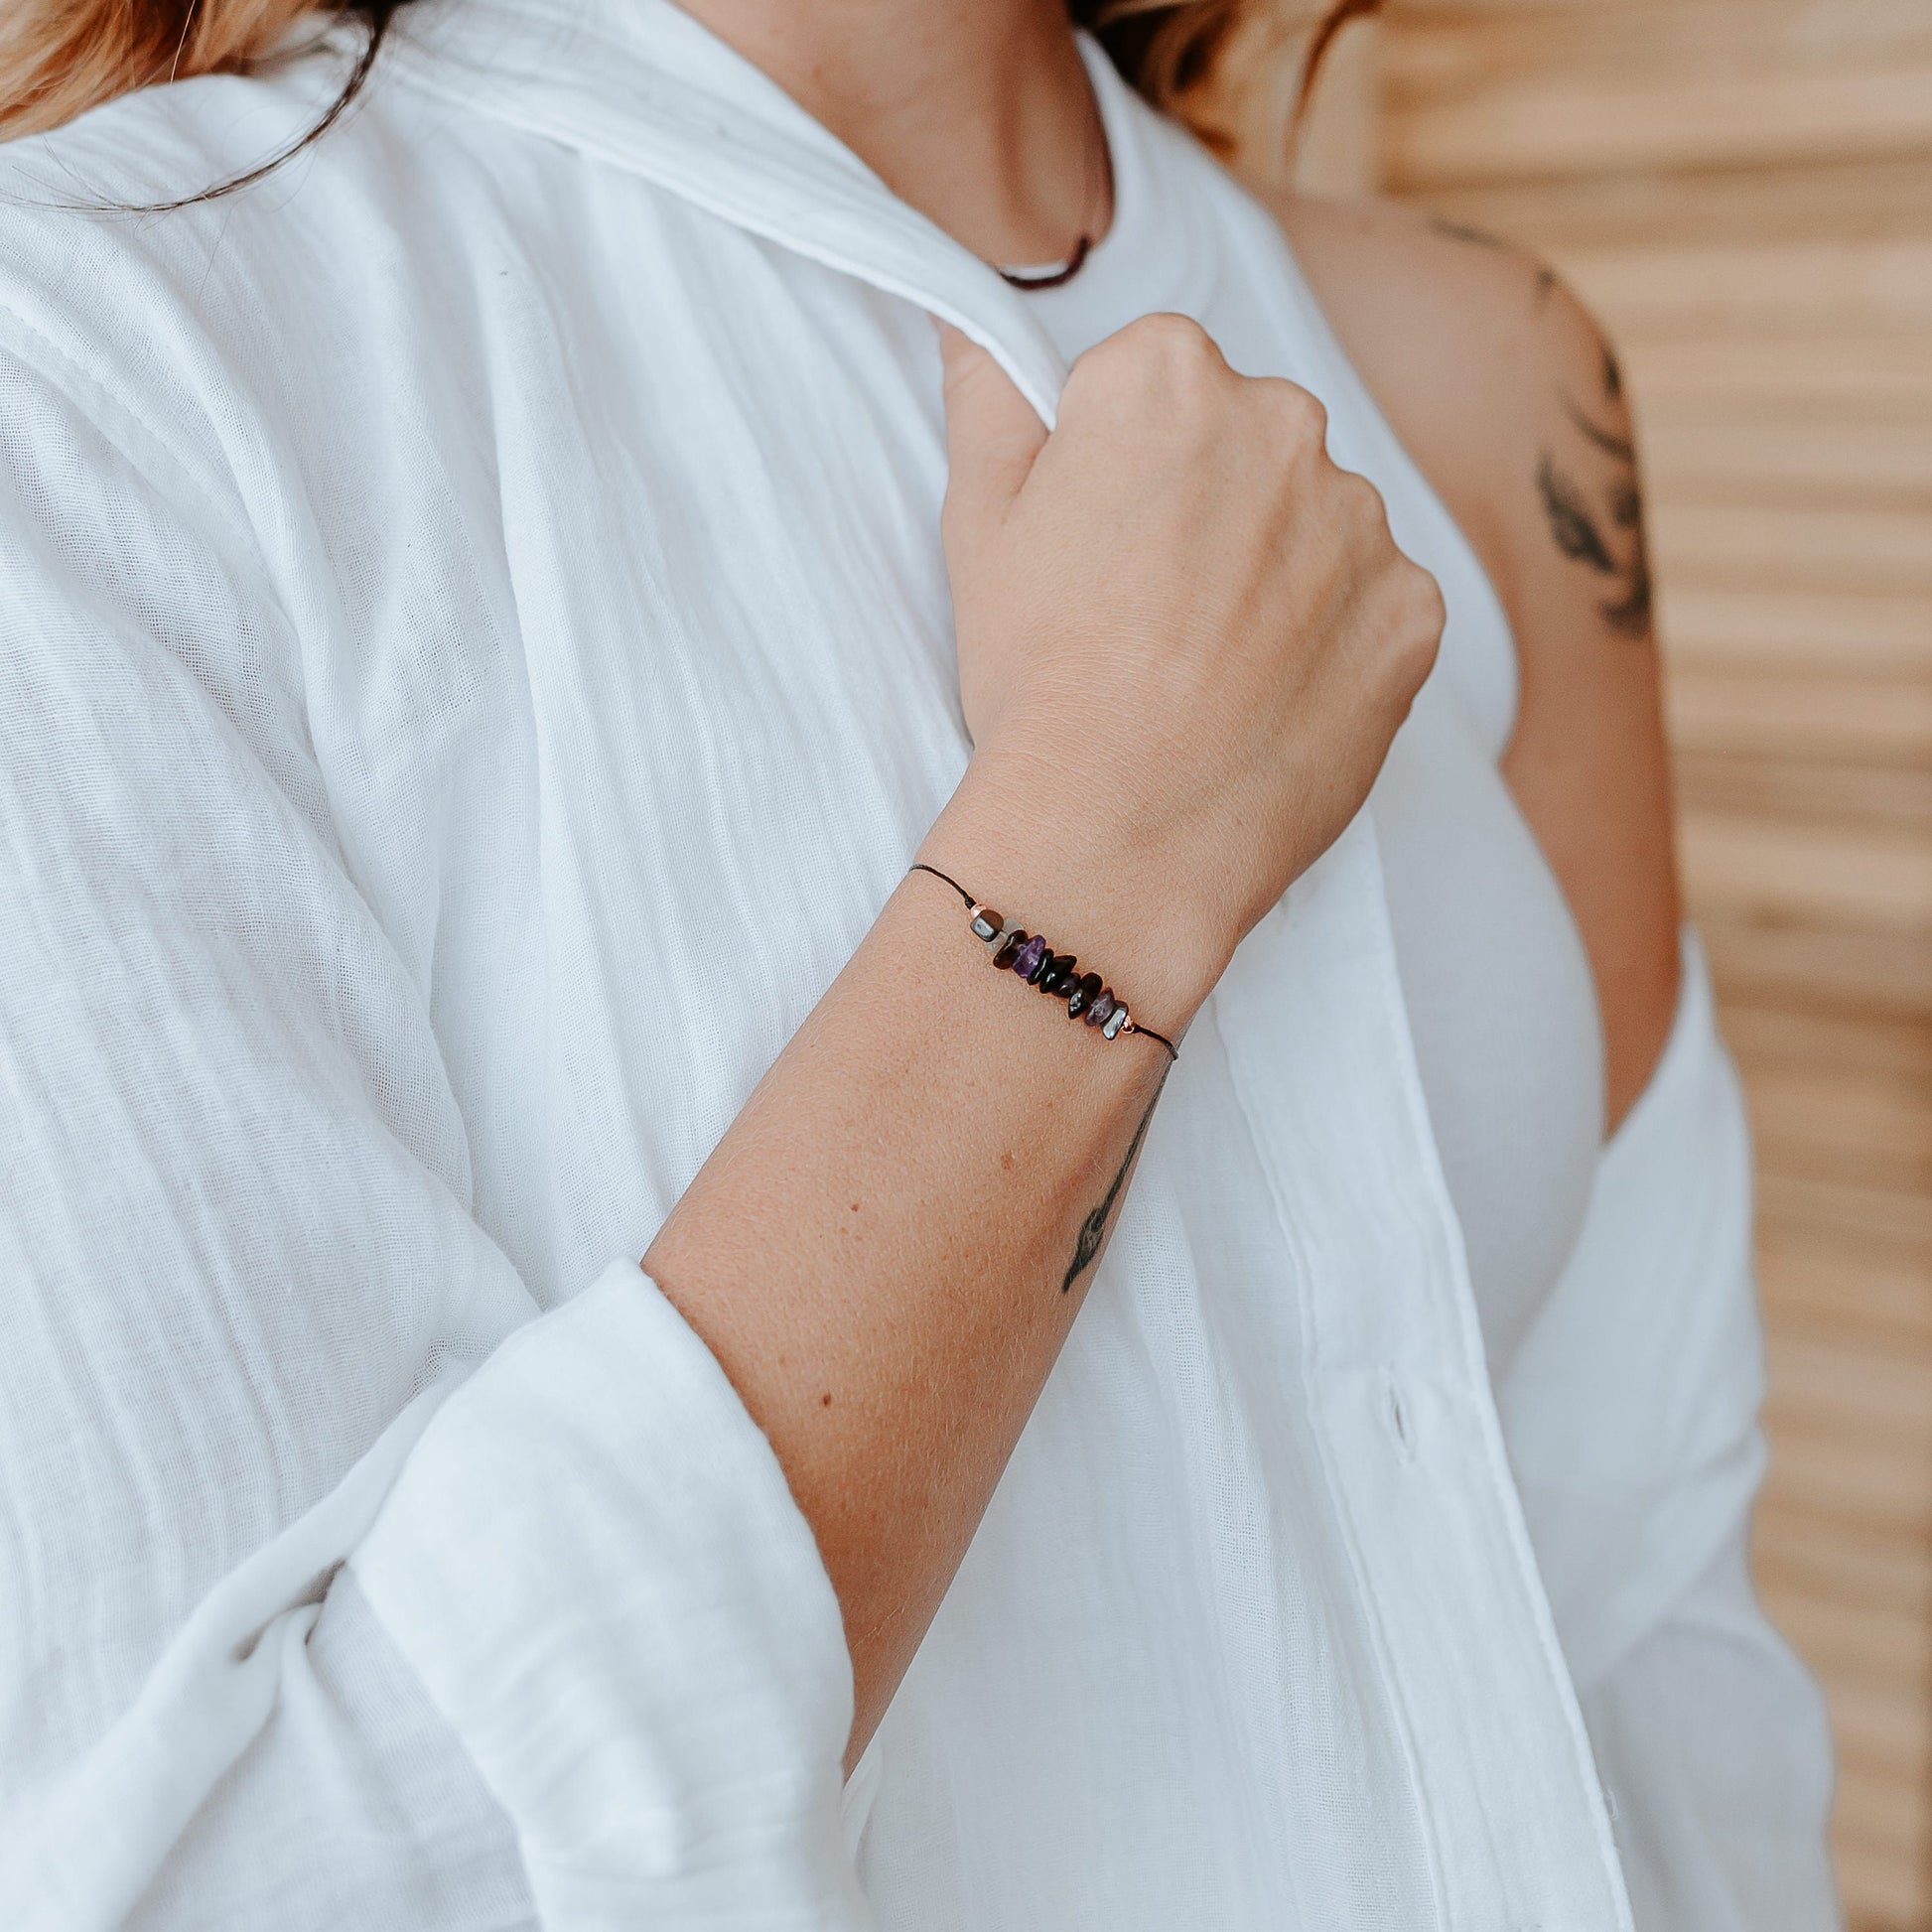 Empath crystal bracelet with an affirmation - Minimal, Casual and stackable - Tie closure - Theblueyogi